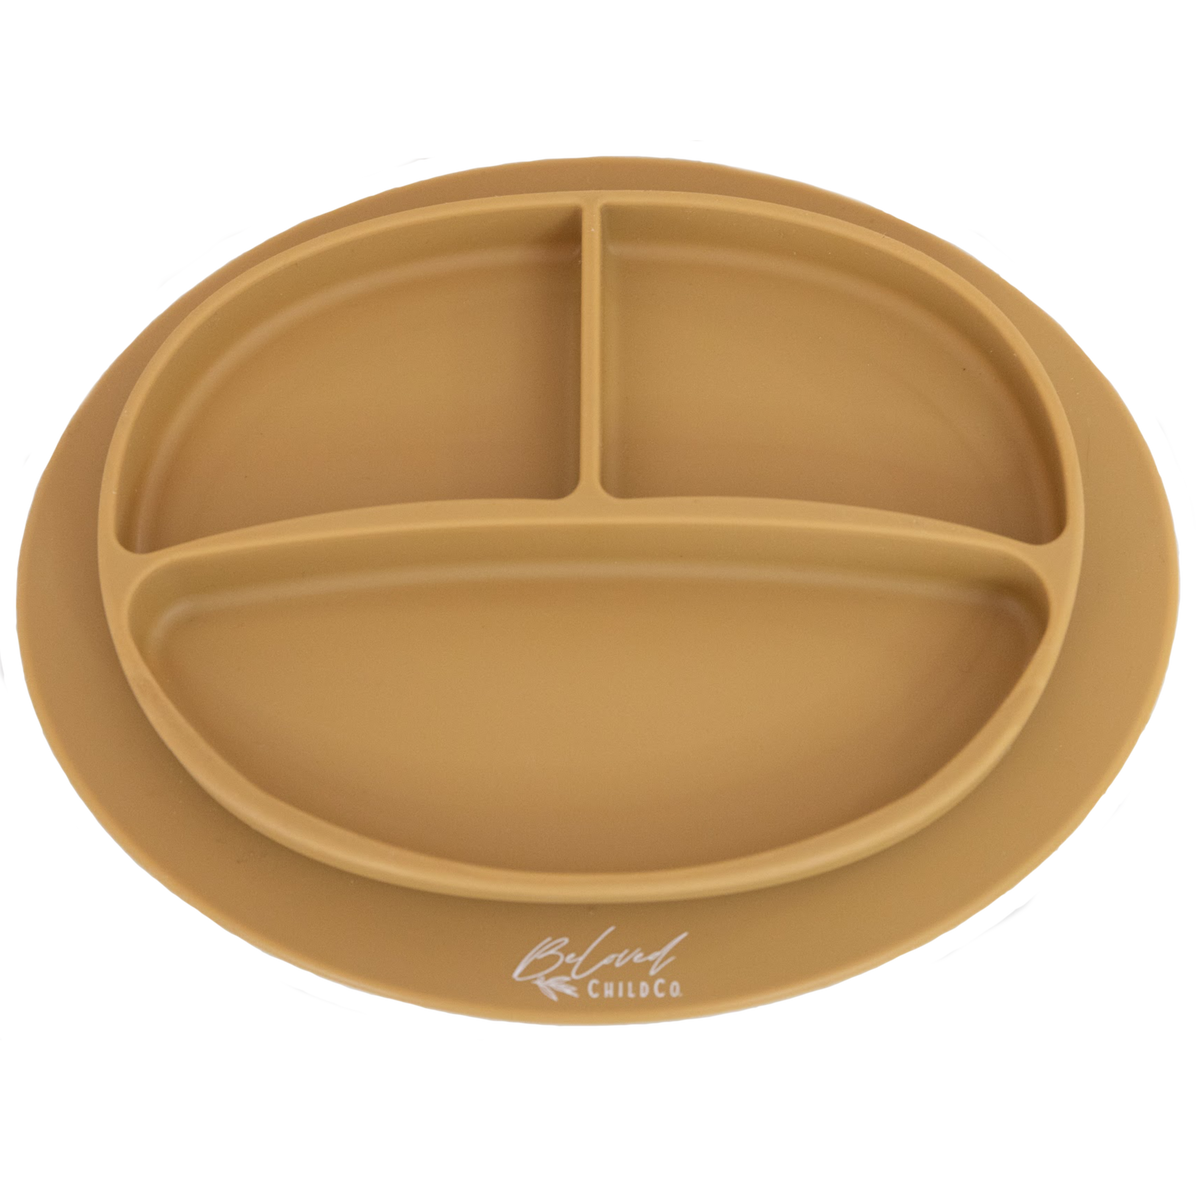 Beloved Child Co. - Suction Plate | Honey